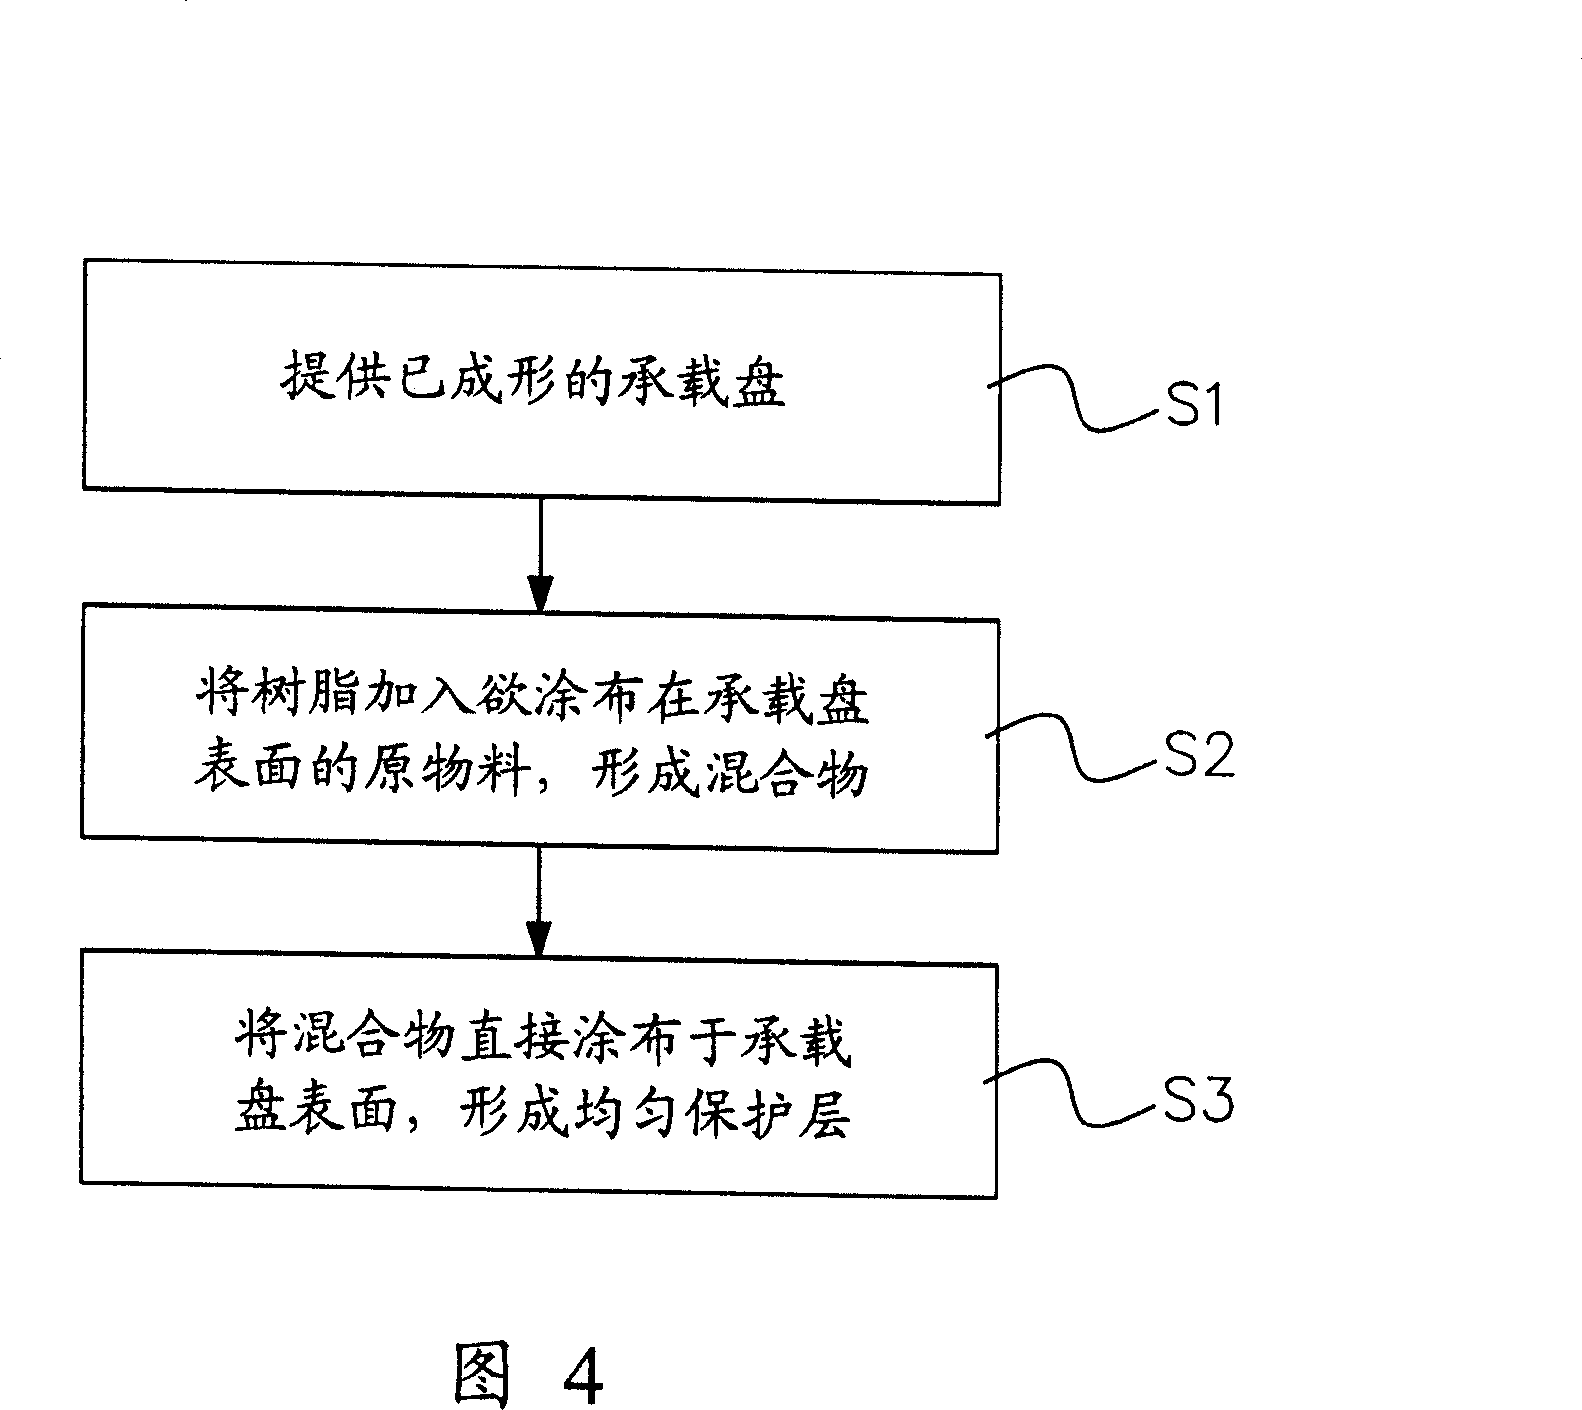 Method for producing chip-bearing disc protective layer